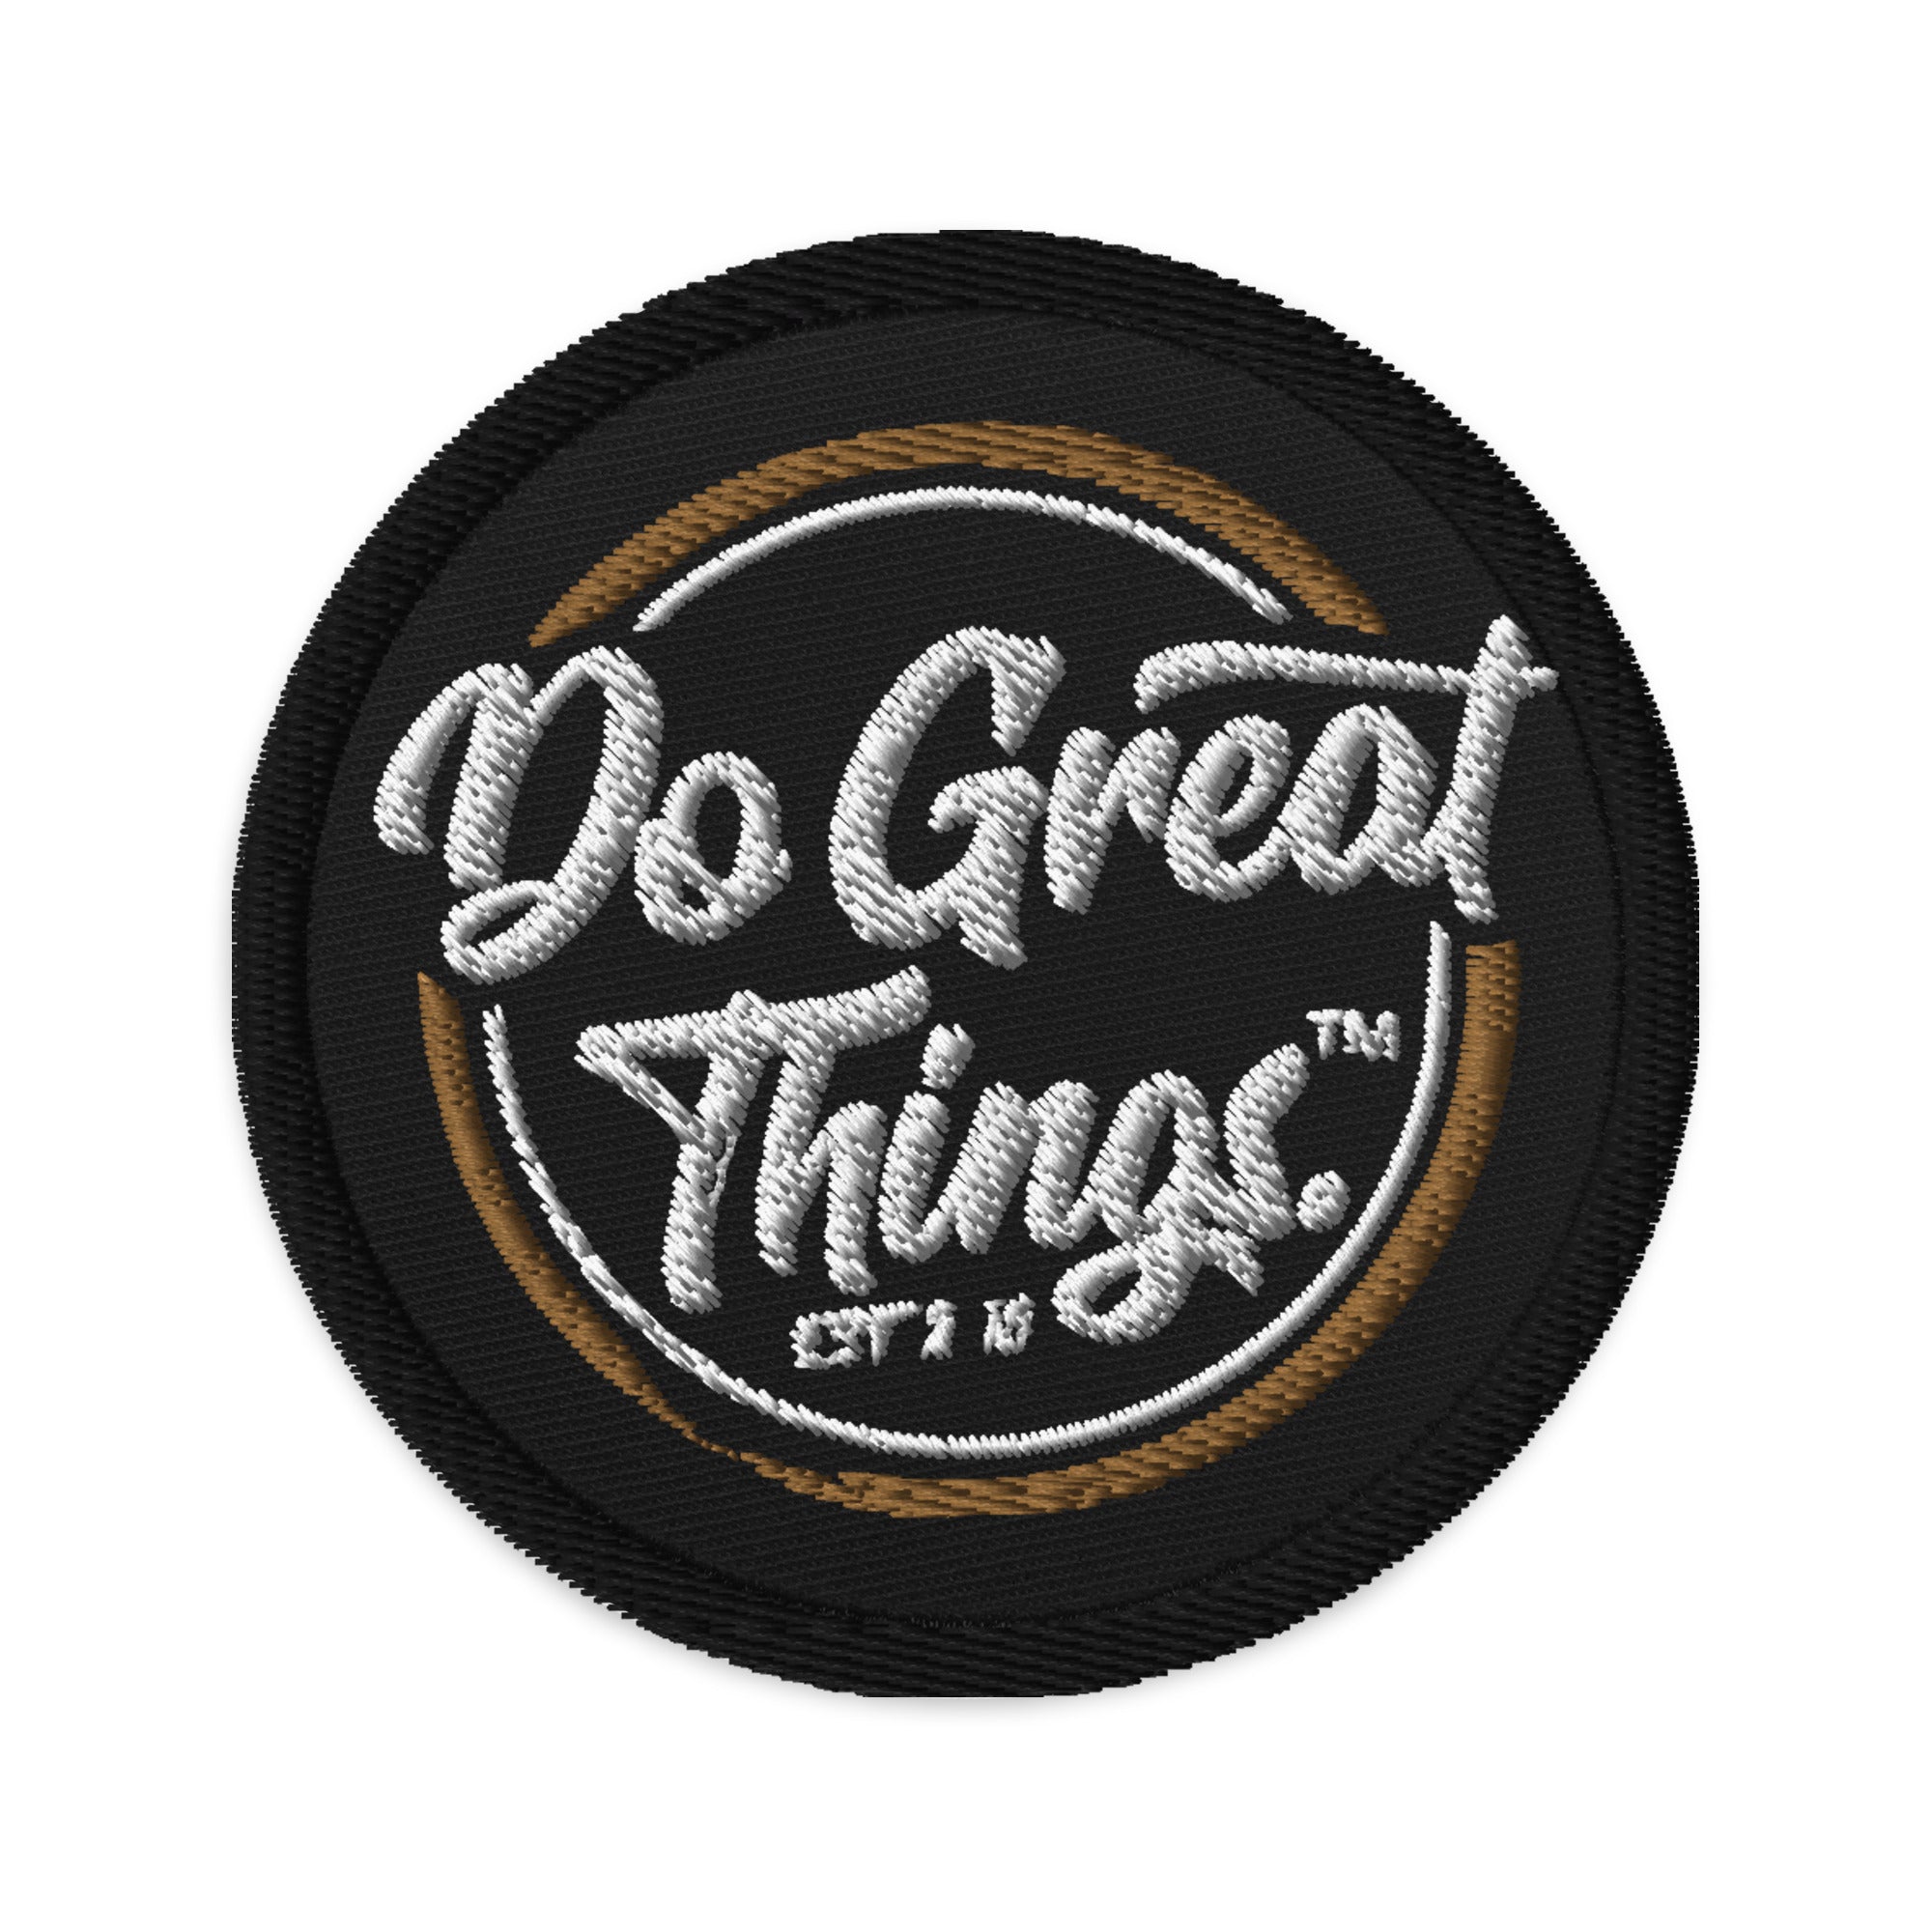 Do Great Things® Embroidered patches